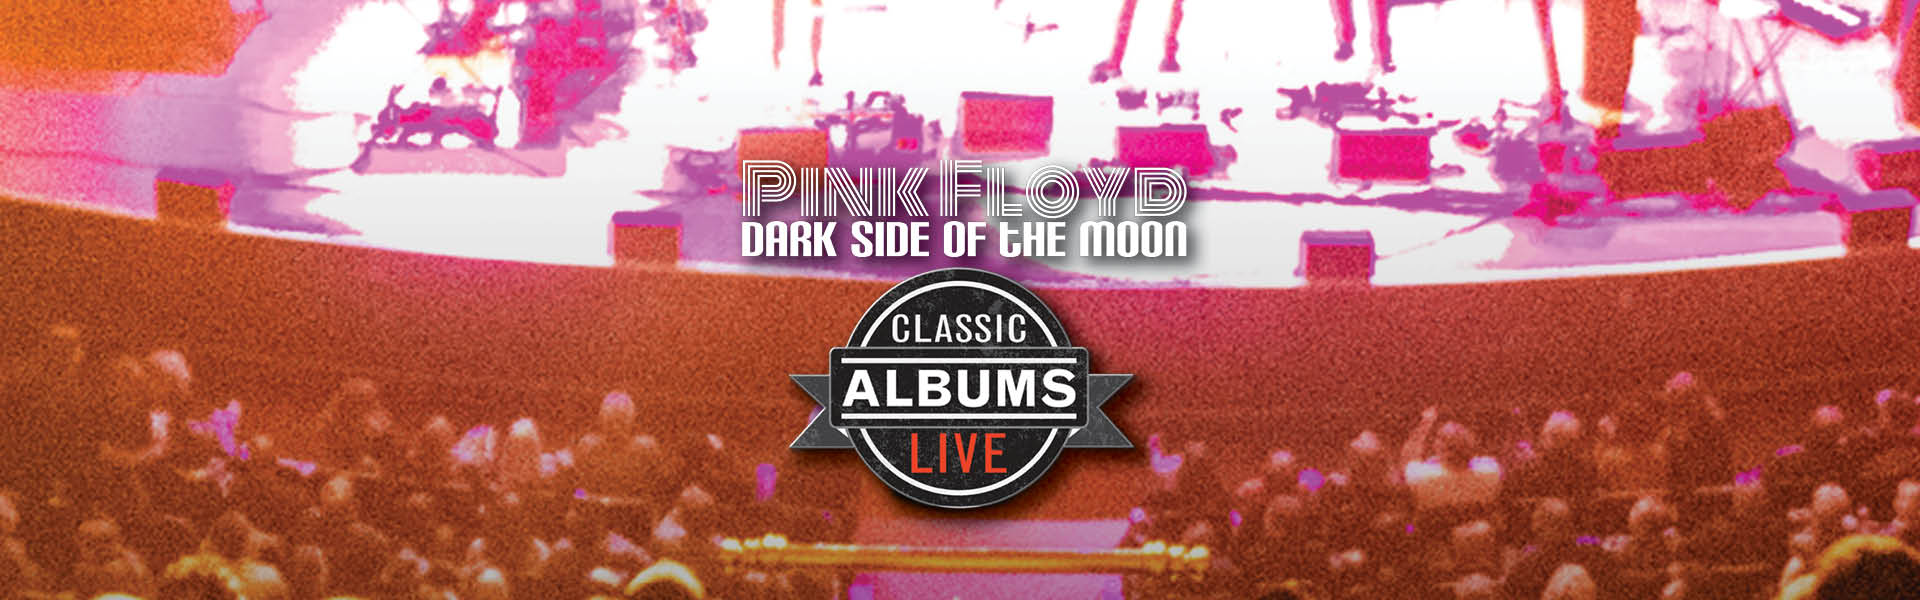 Classic Albums Live - Pink Floyd